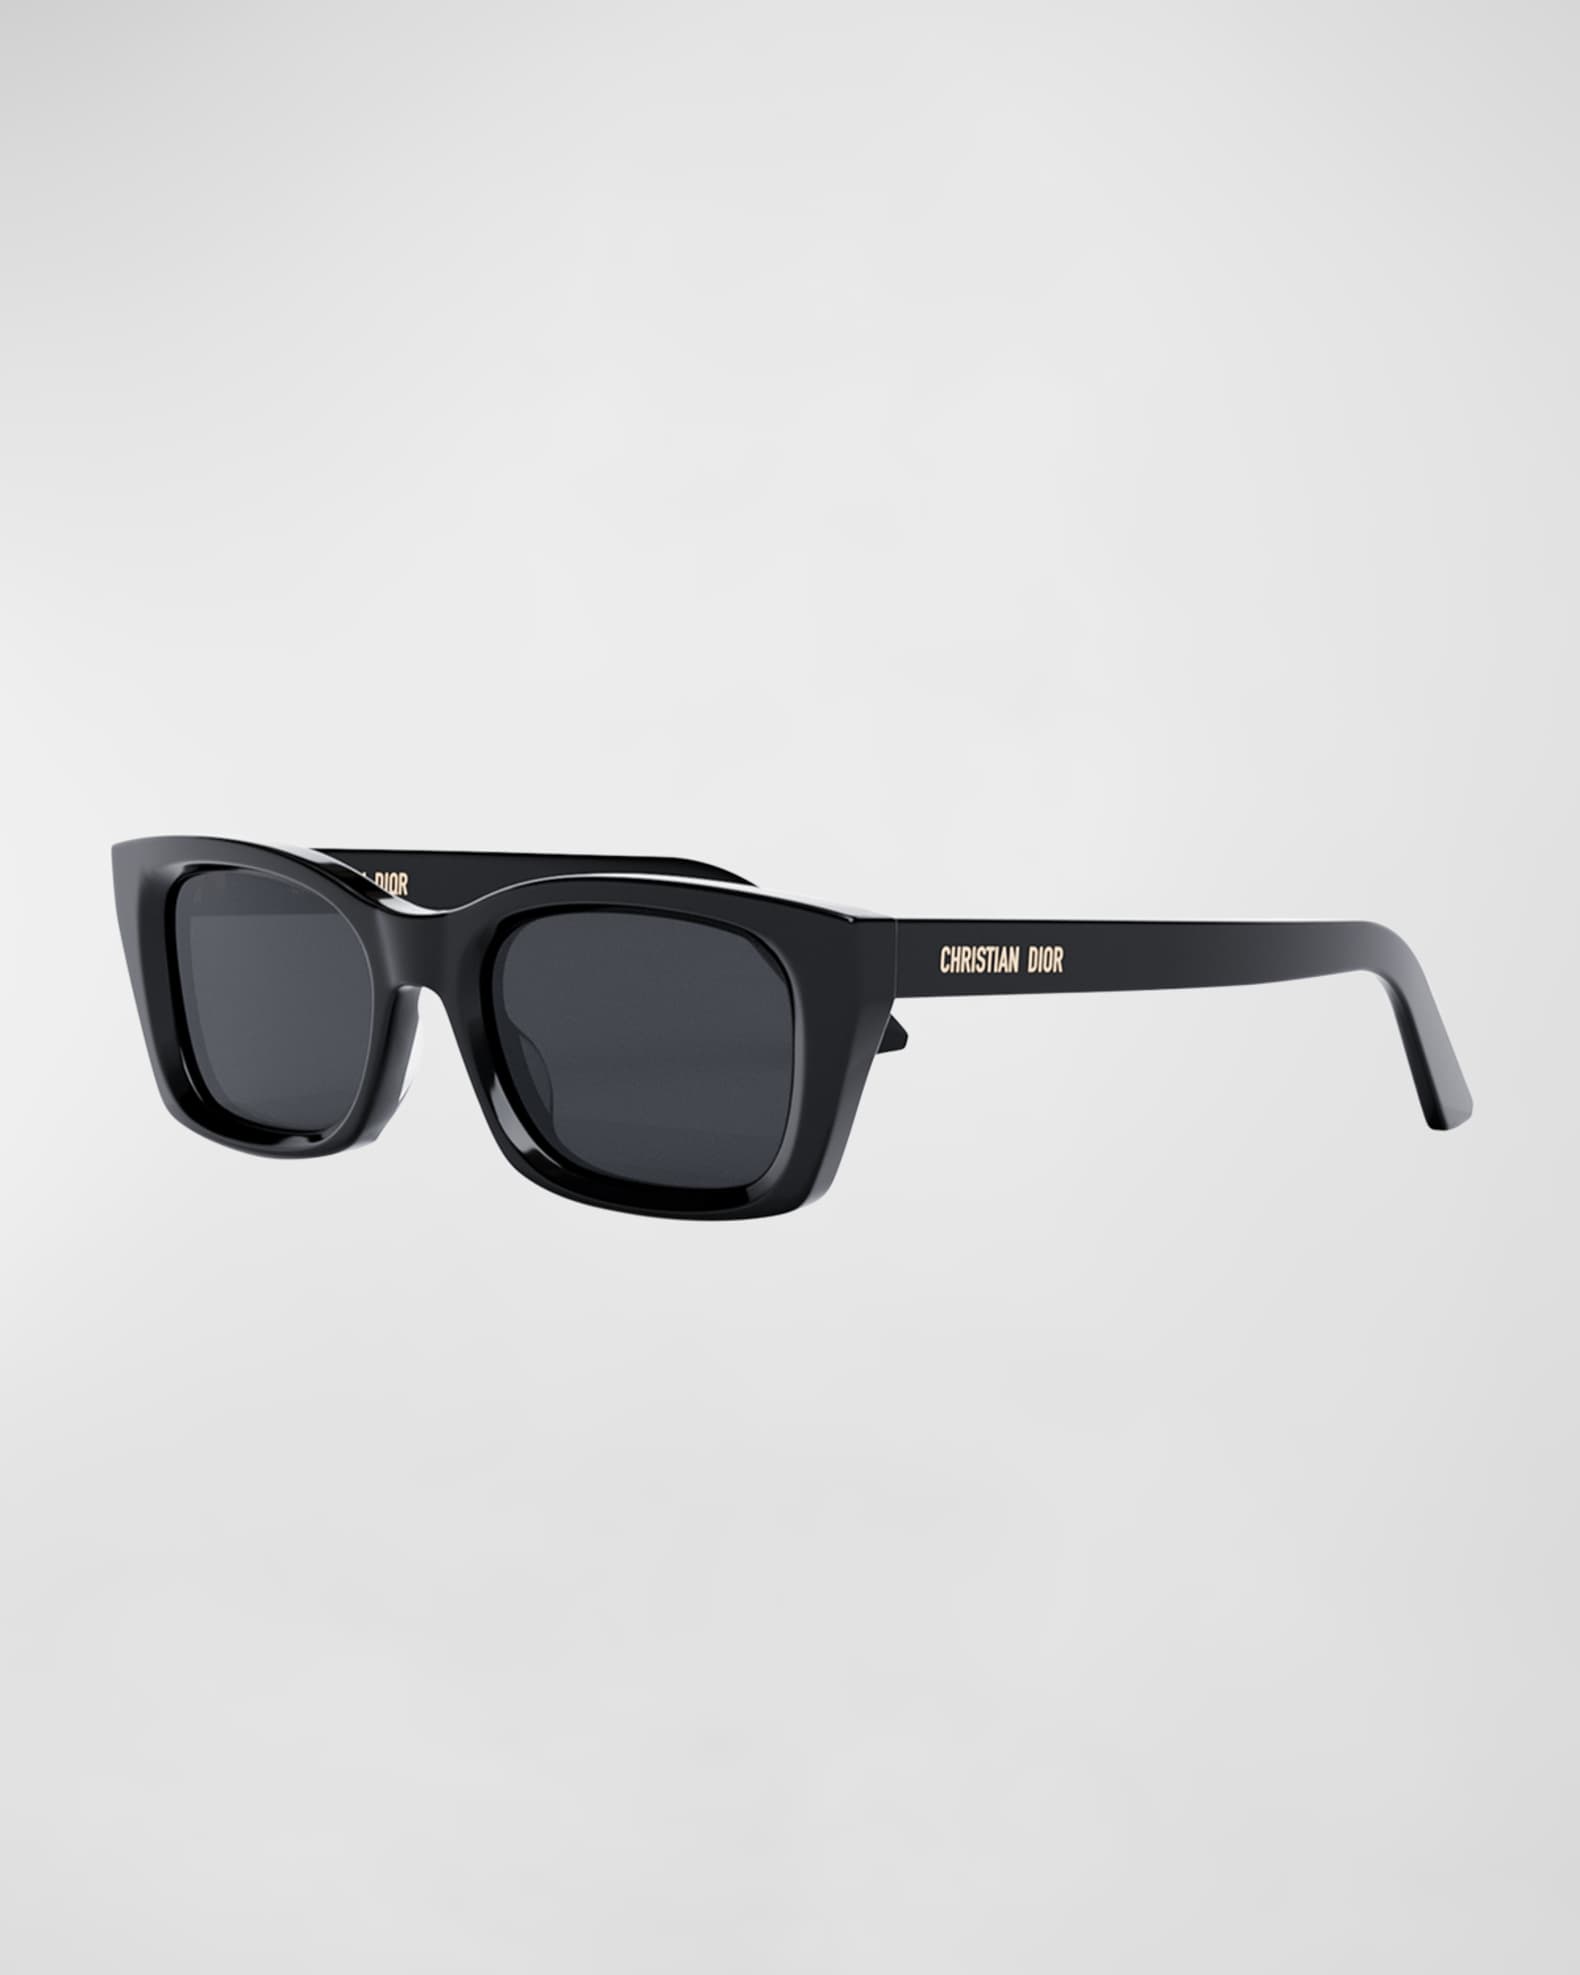 Chanel Butterfly Sunglasses With Ruched Leather Detail in Black